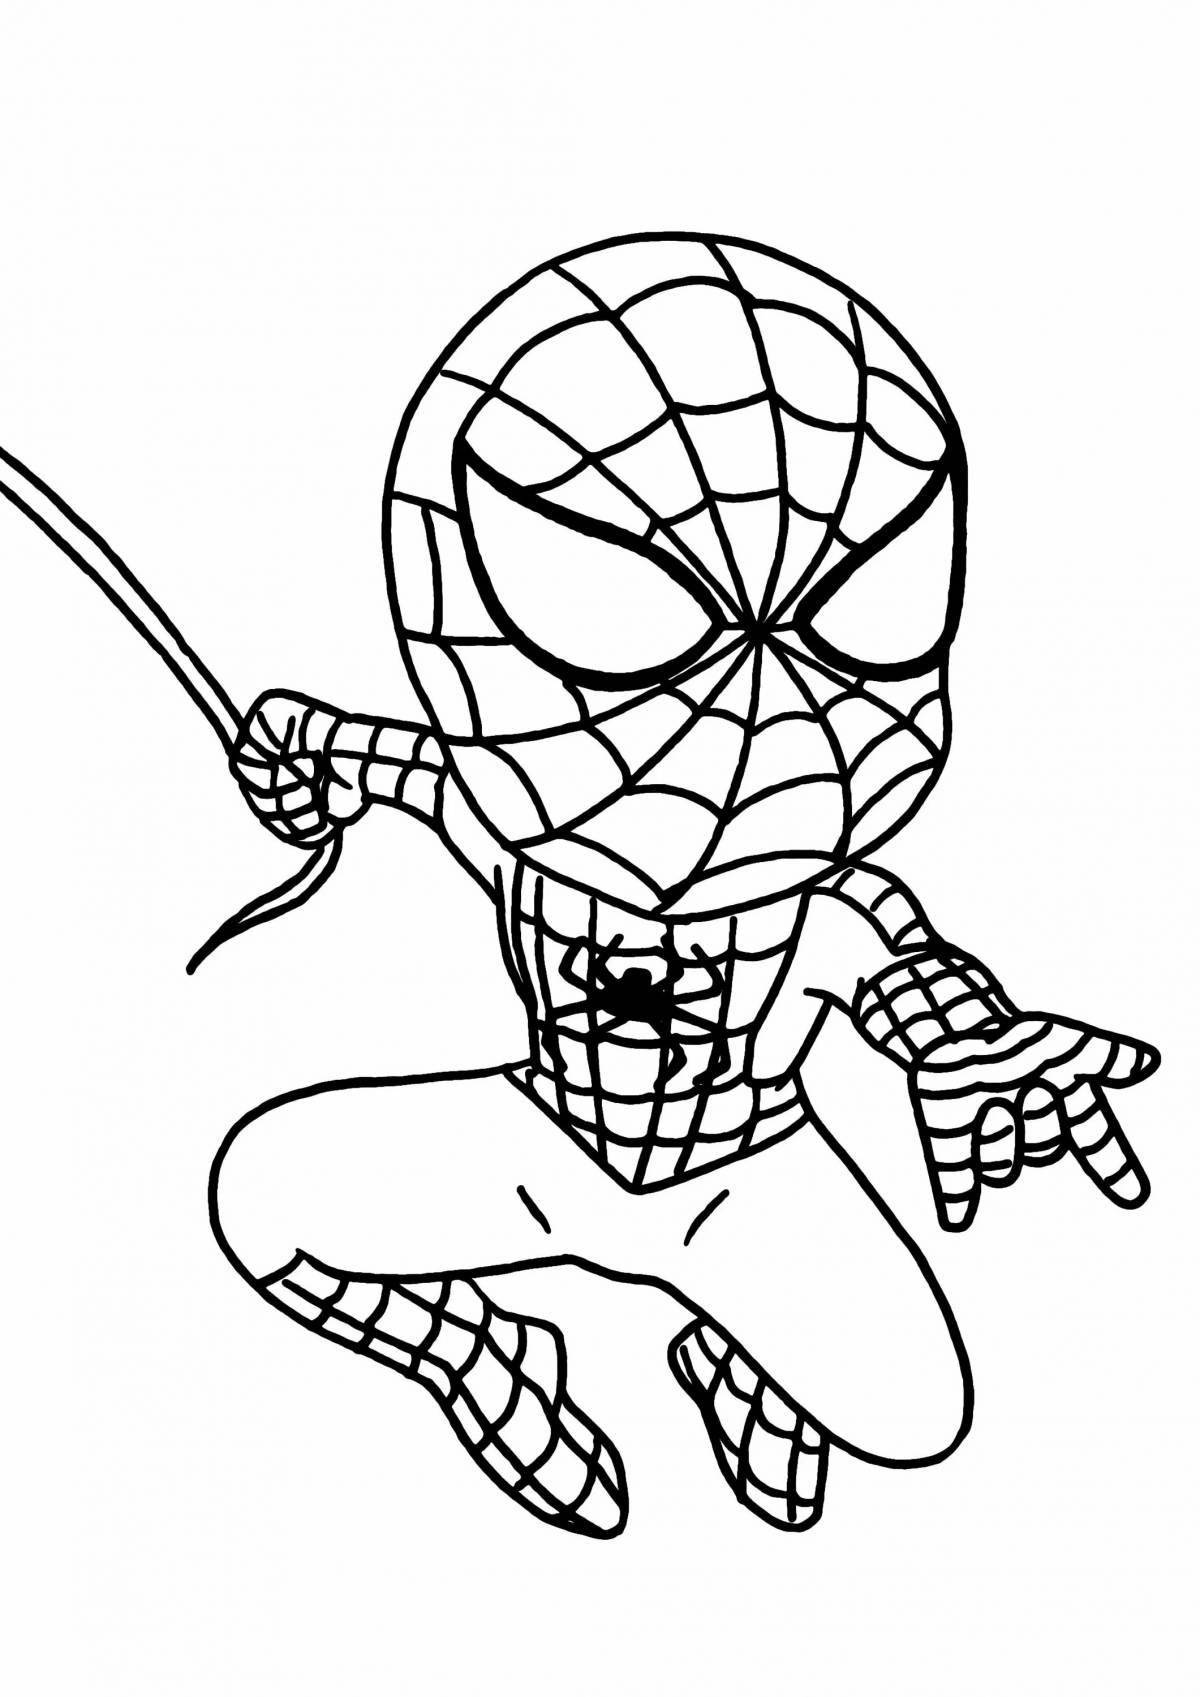 Spider-man bright coloring book for children 5 years old